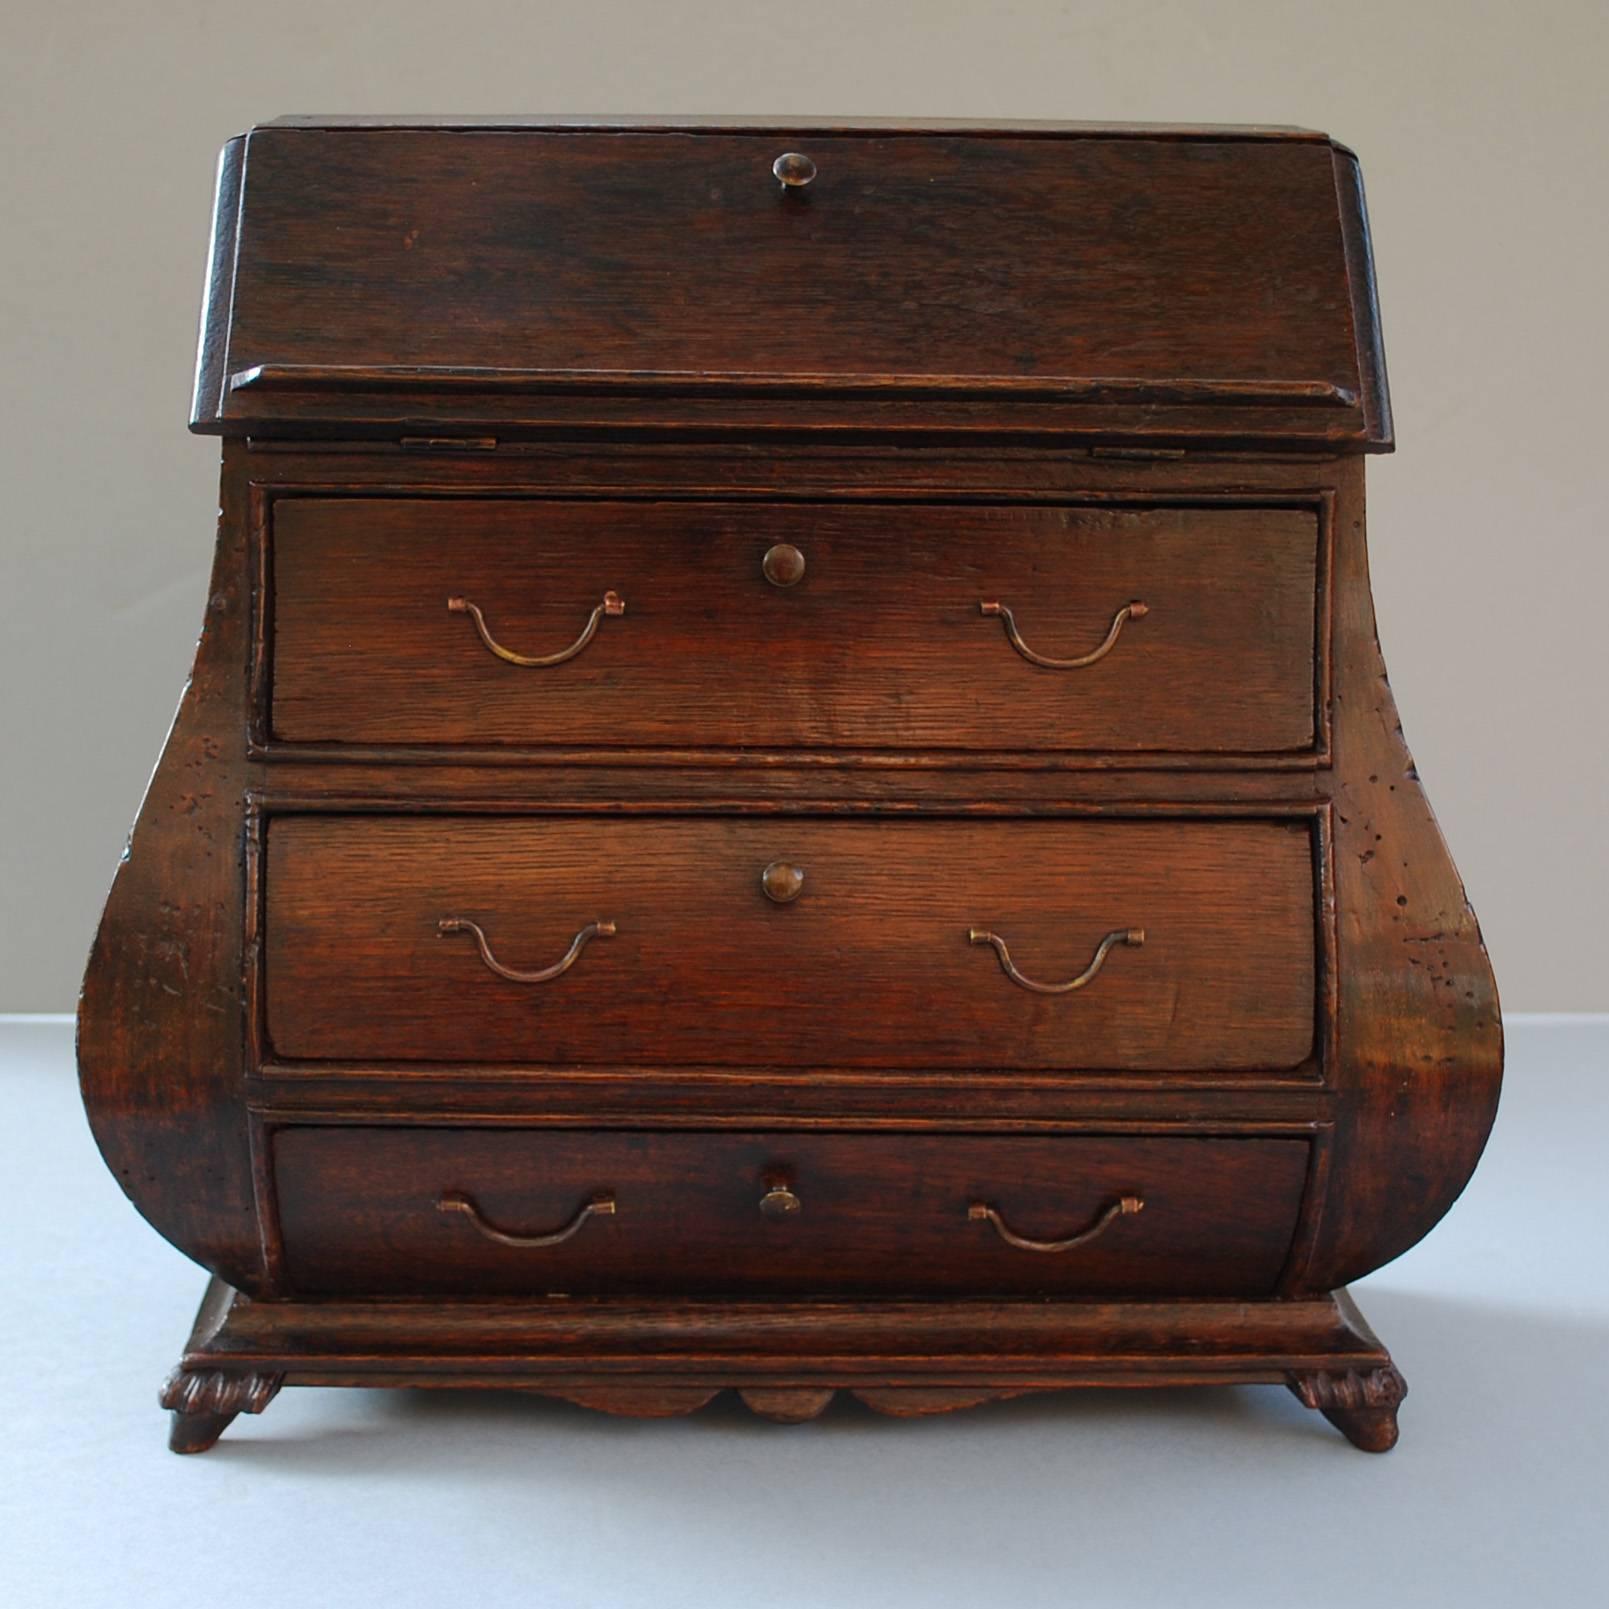 19th century miniature secretaire cabinet made from Oakwood.
Decorative object, can be used as jewelry/letter box.
Originates Netherlands, dating, circa 1800
